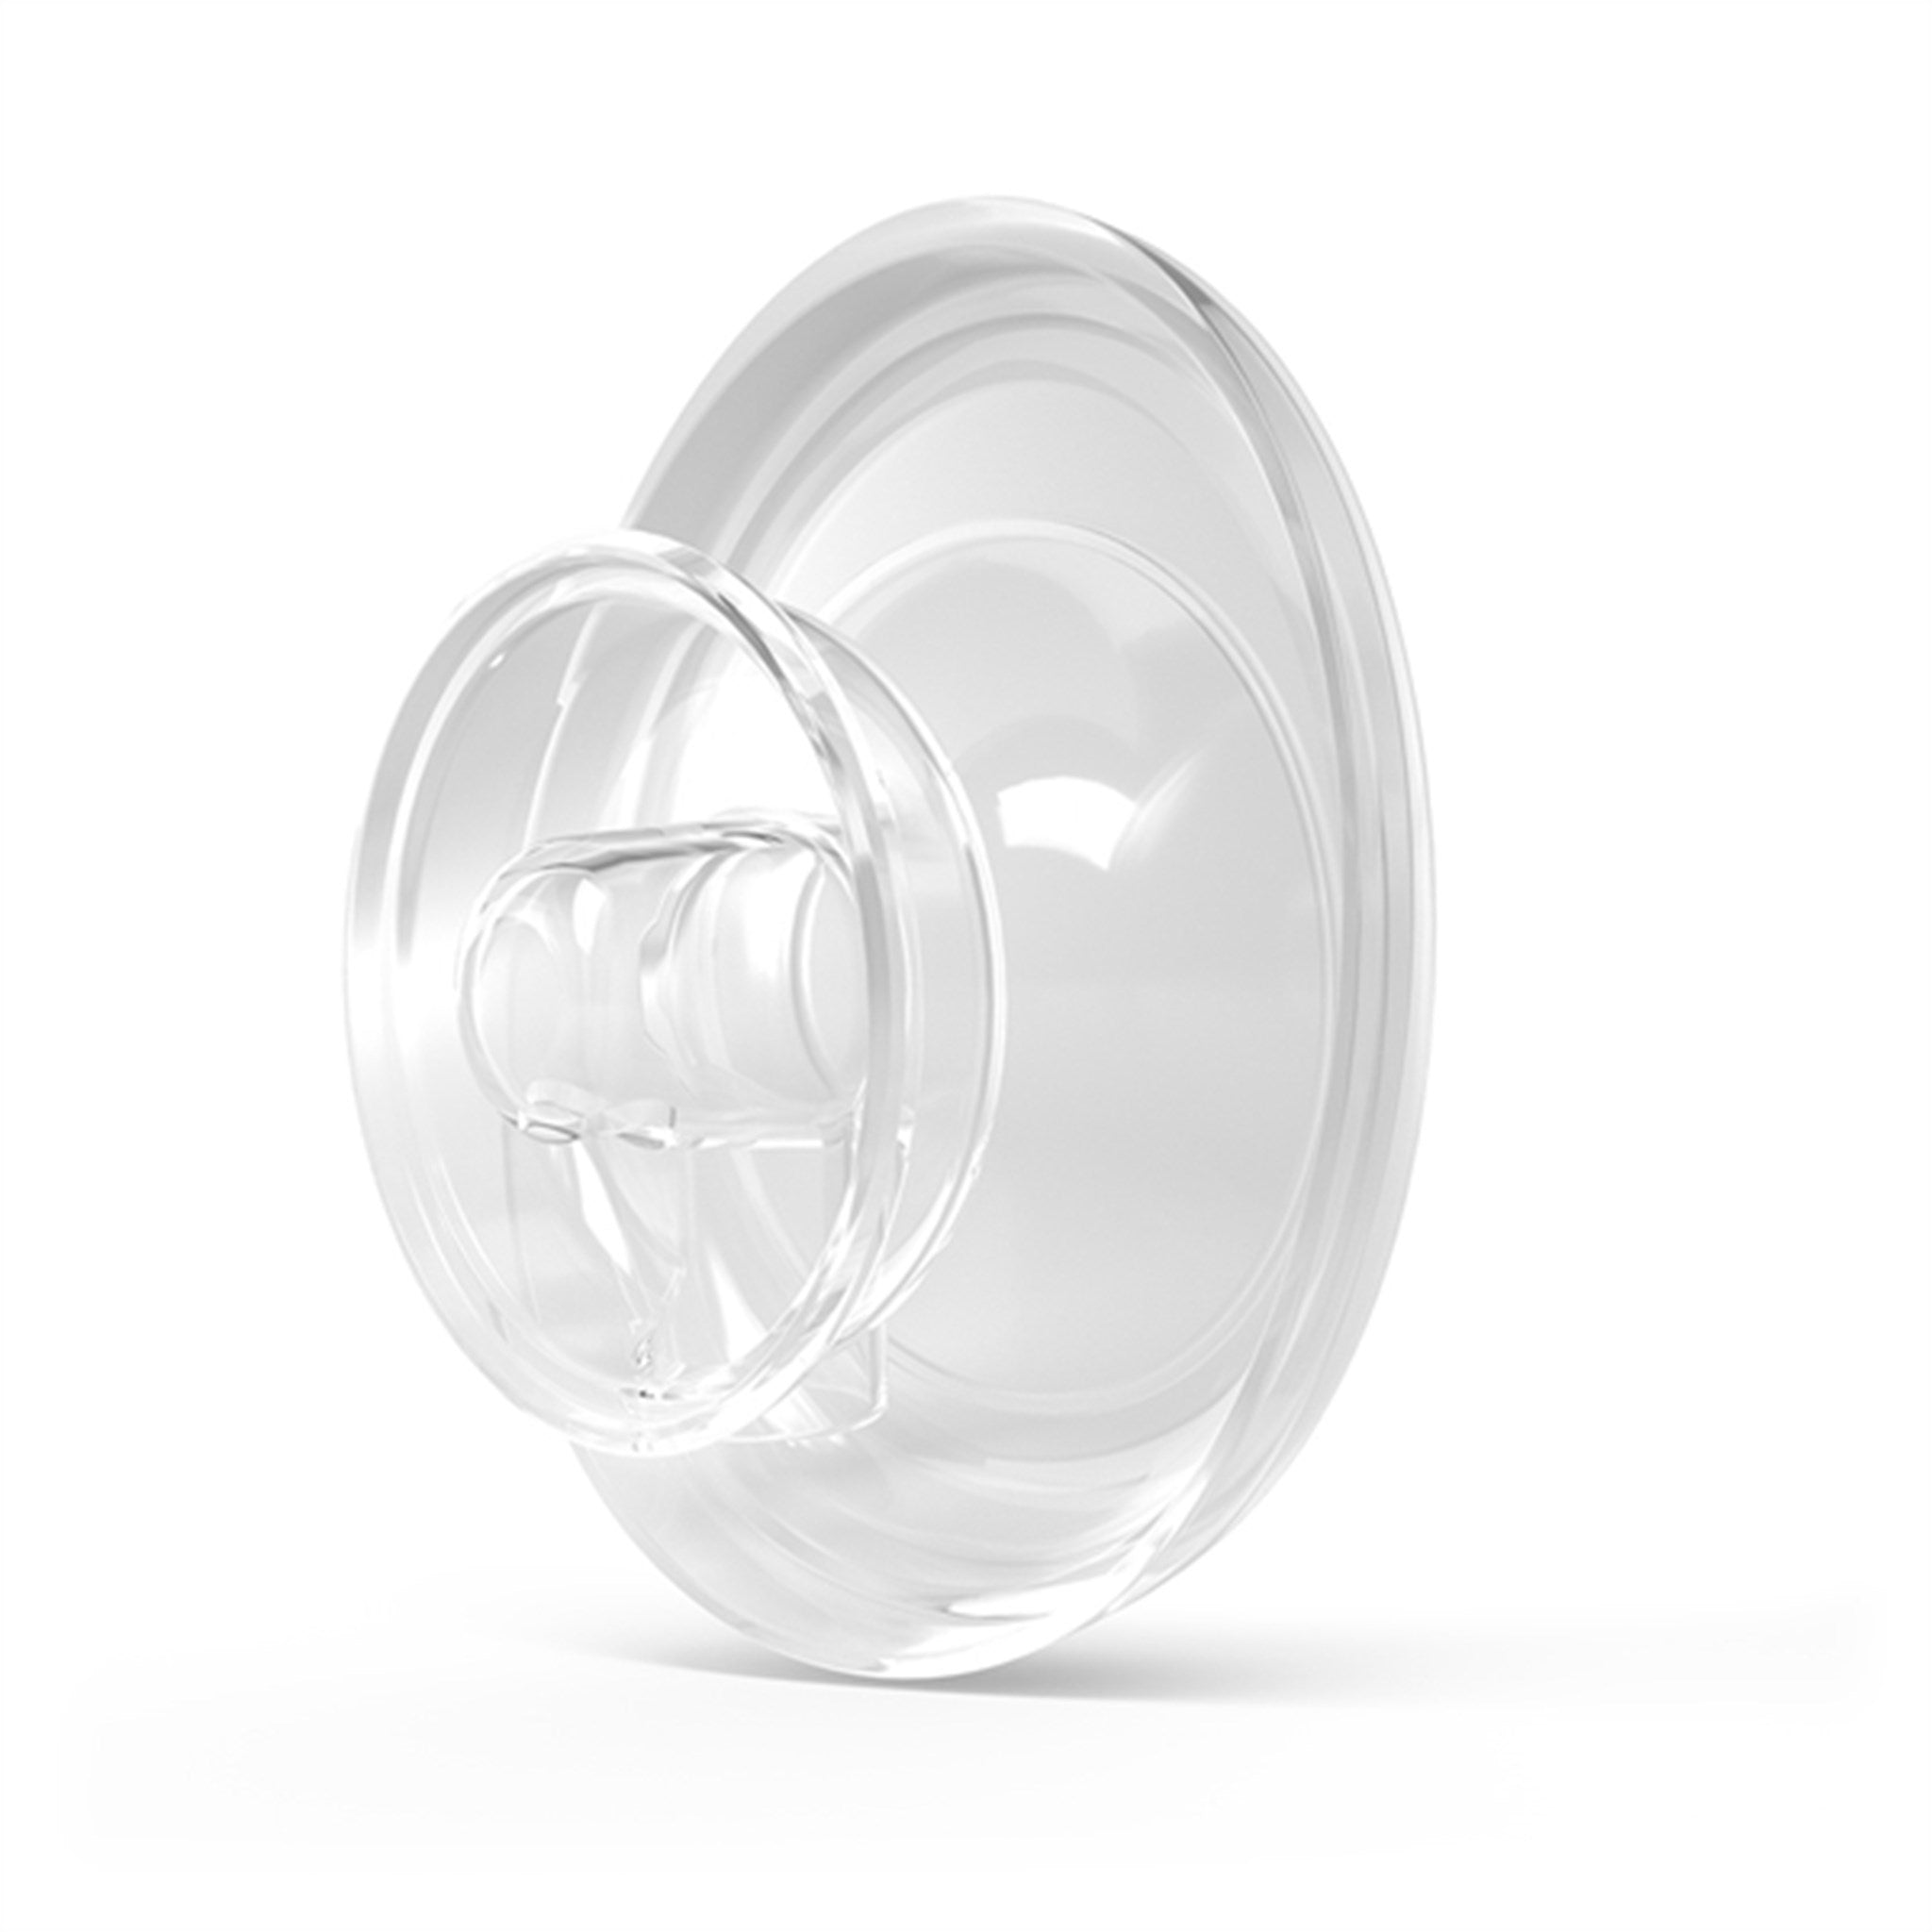 Elvie Stride Breast Seal 28 mm 2-Pack White/Clear